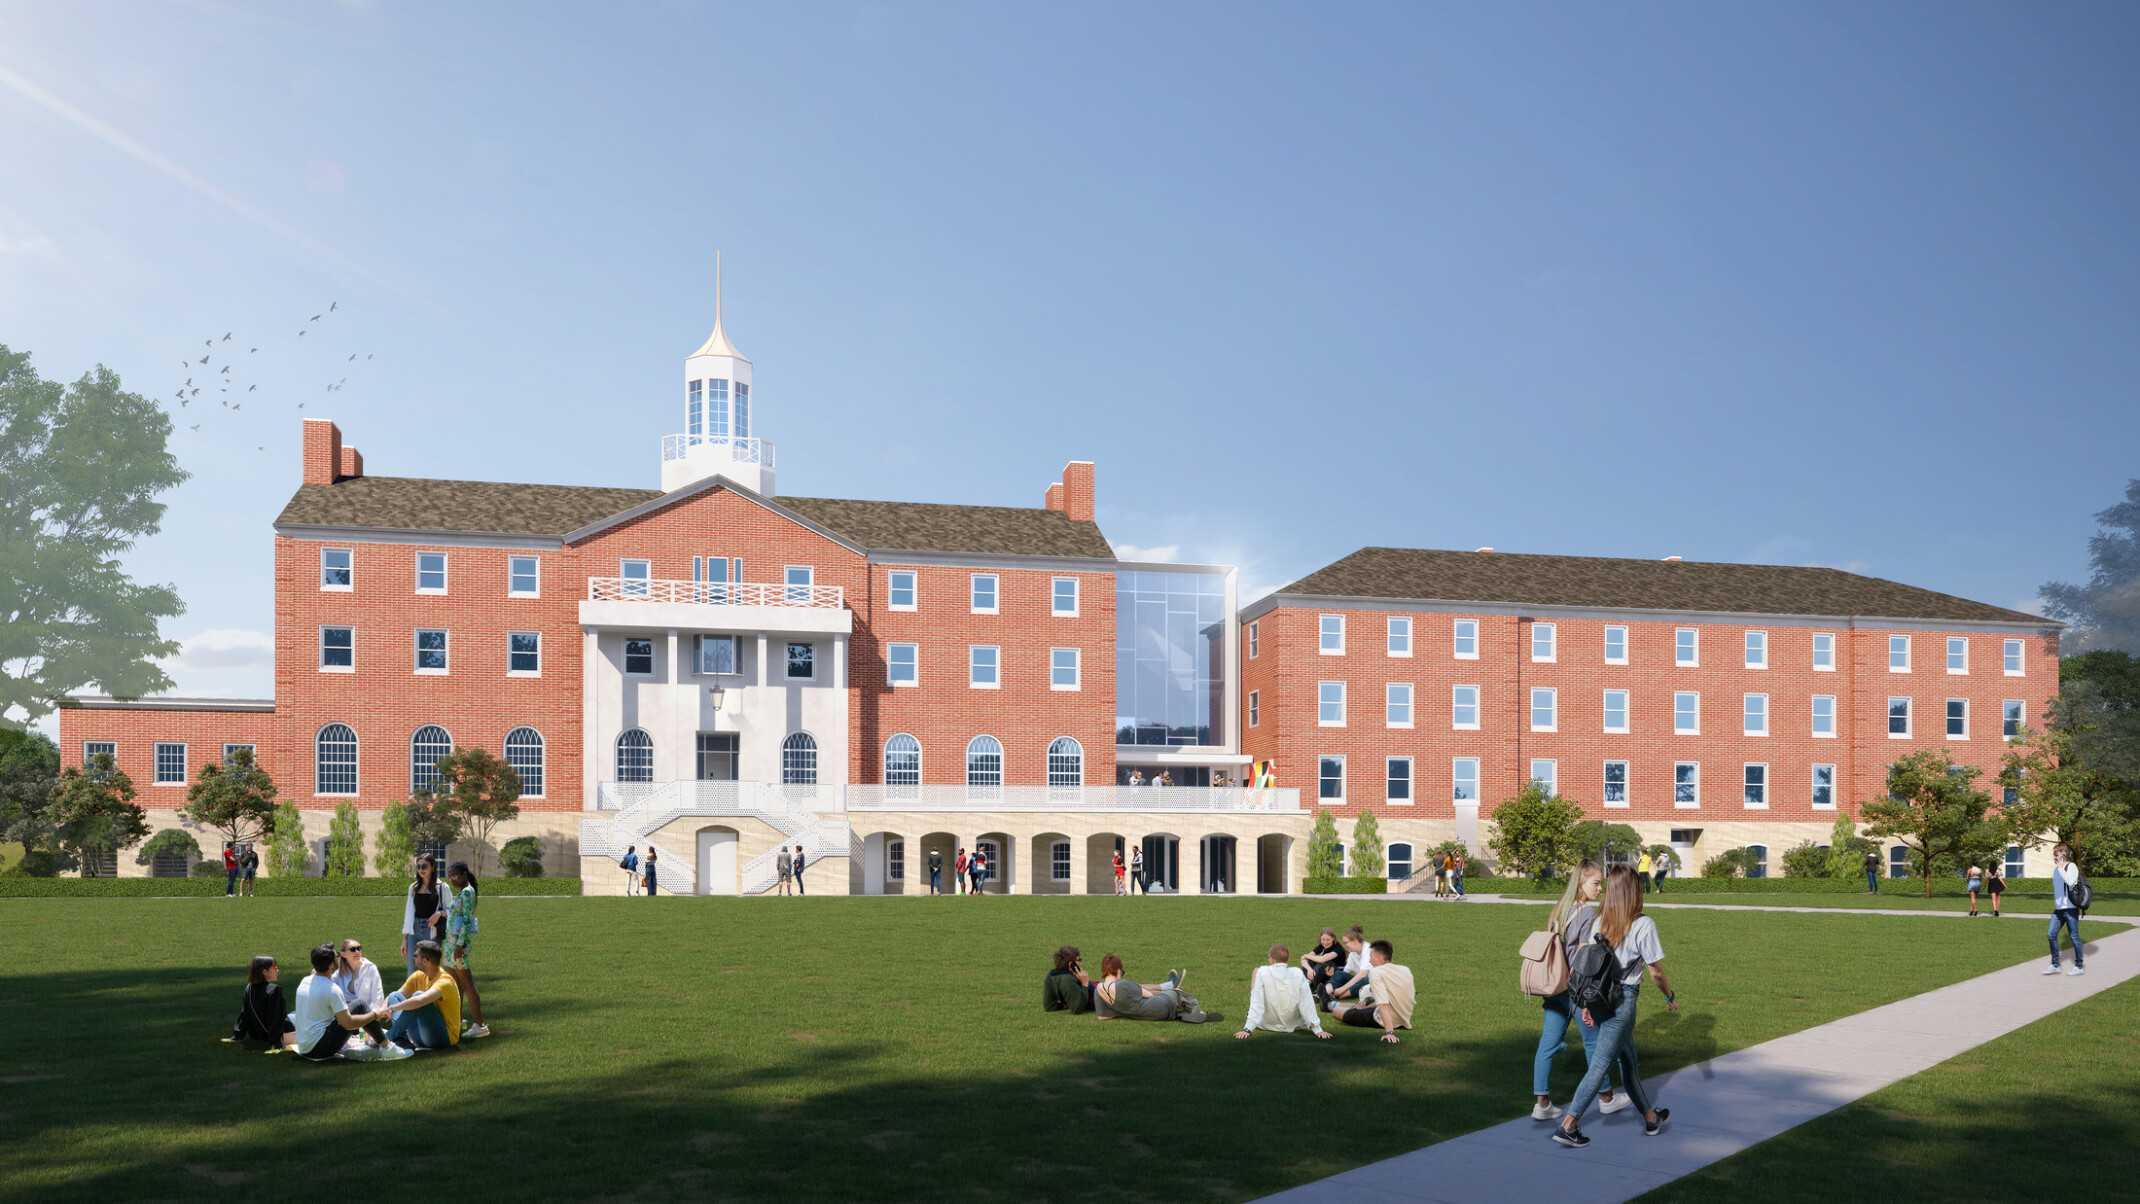 Rendering of the college university campus showing two brick buildings with white accents